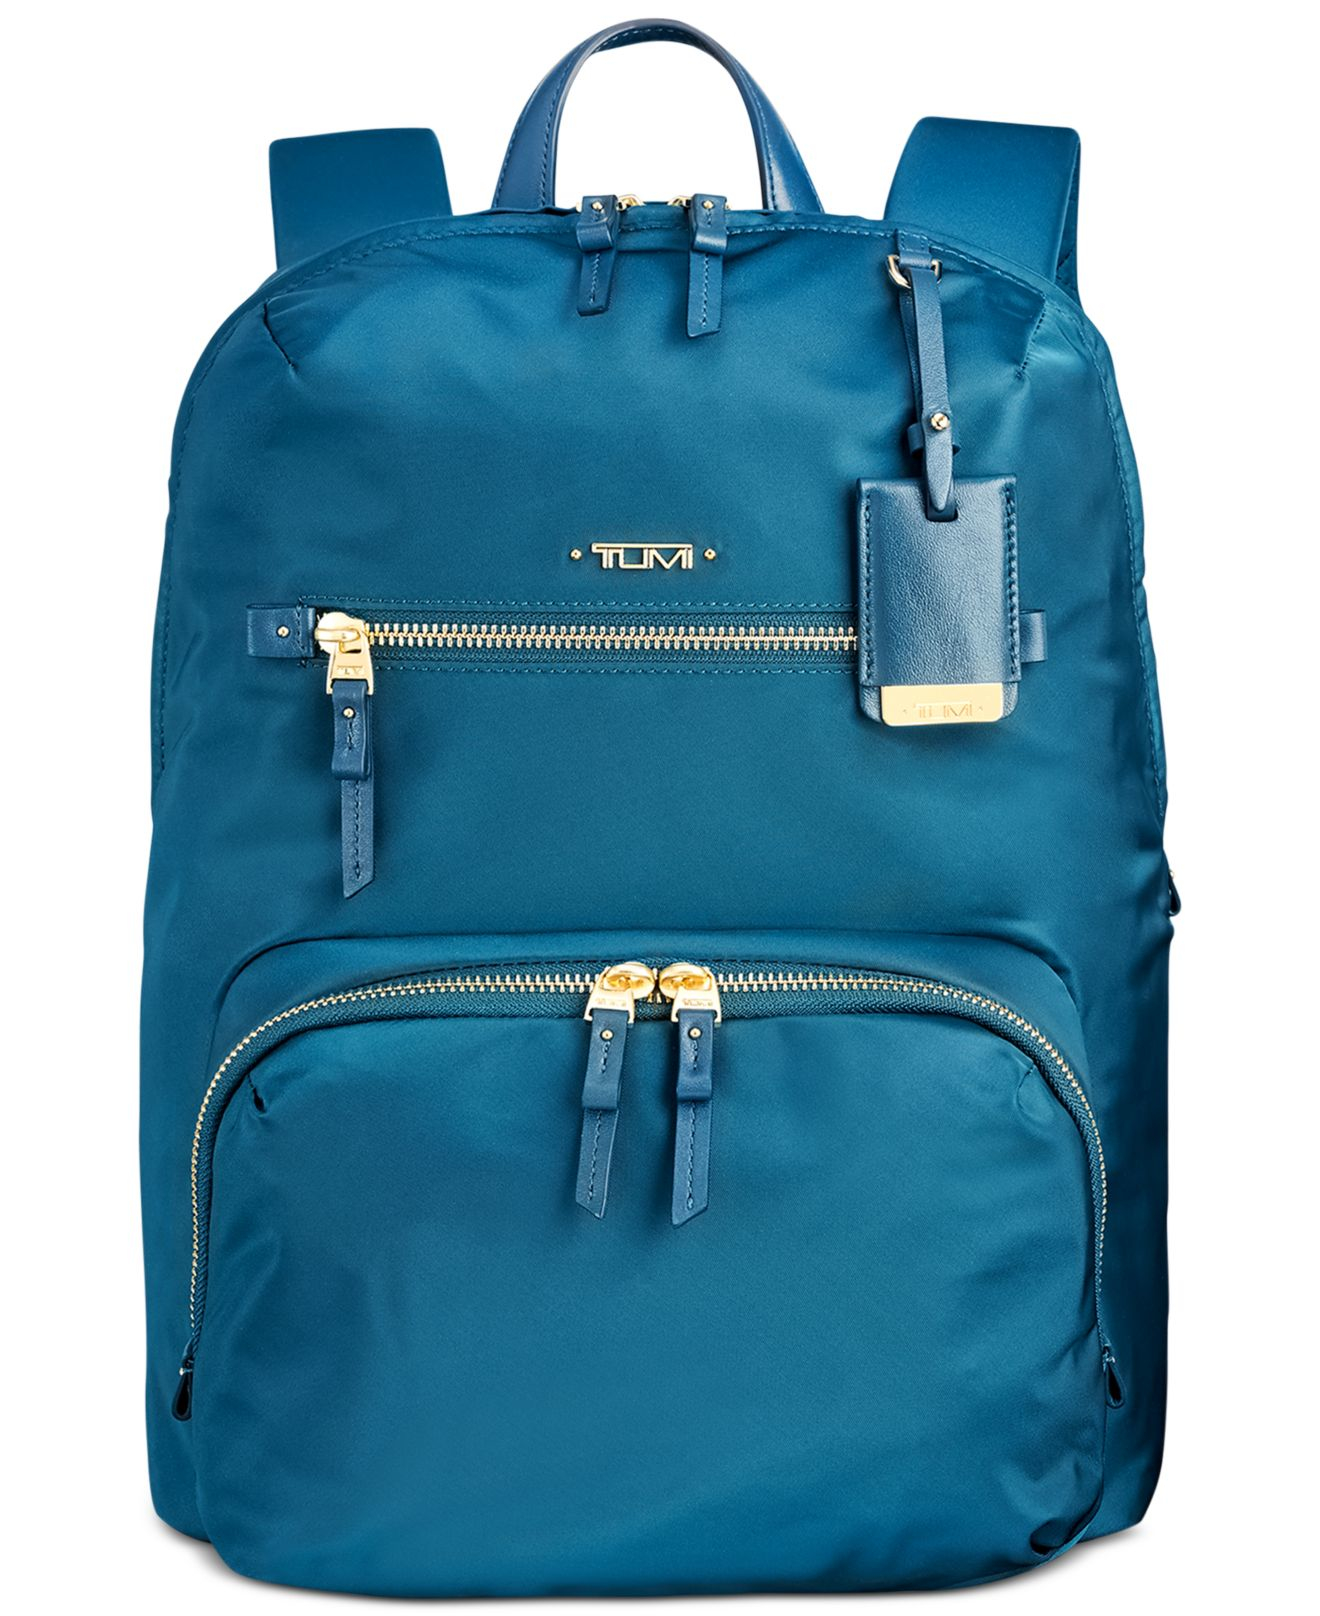 Lyst - Tumi Voyageur Halle Backpack in Blue